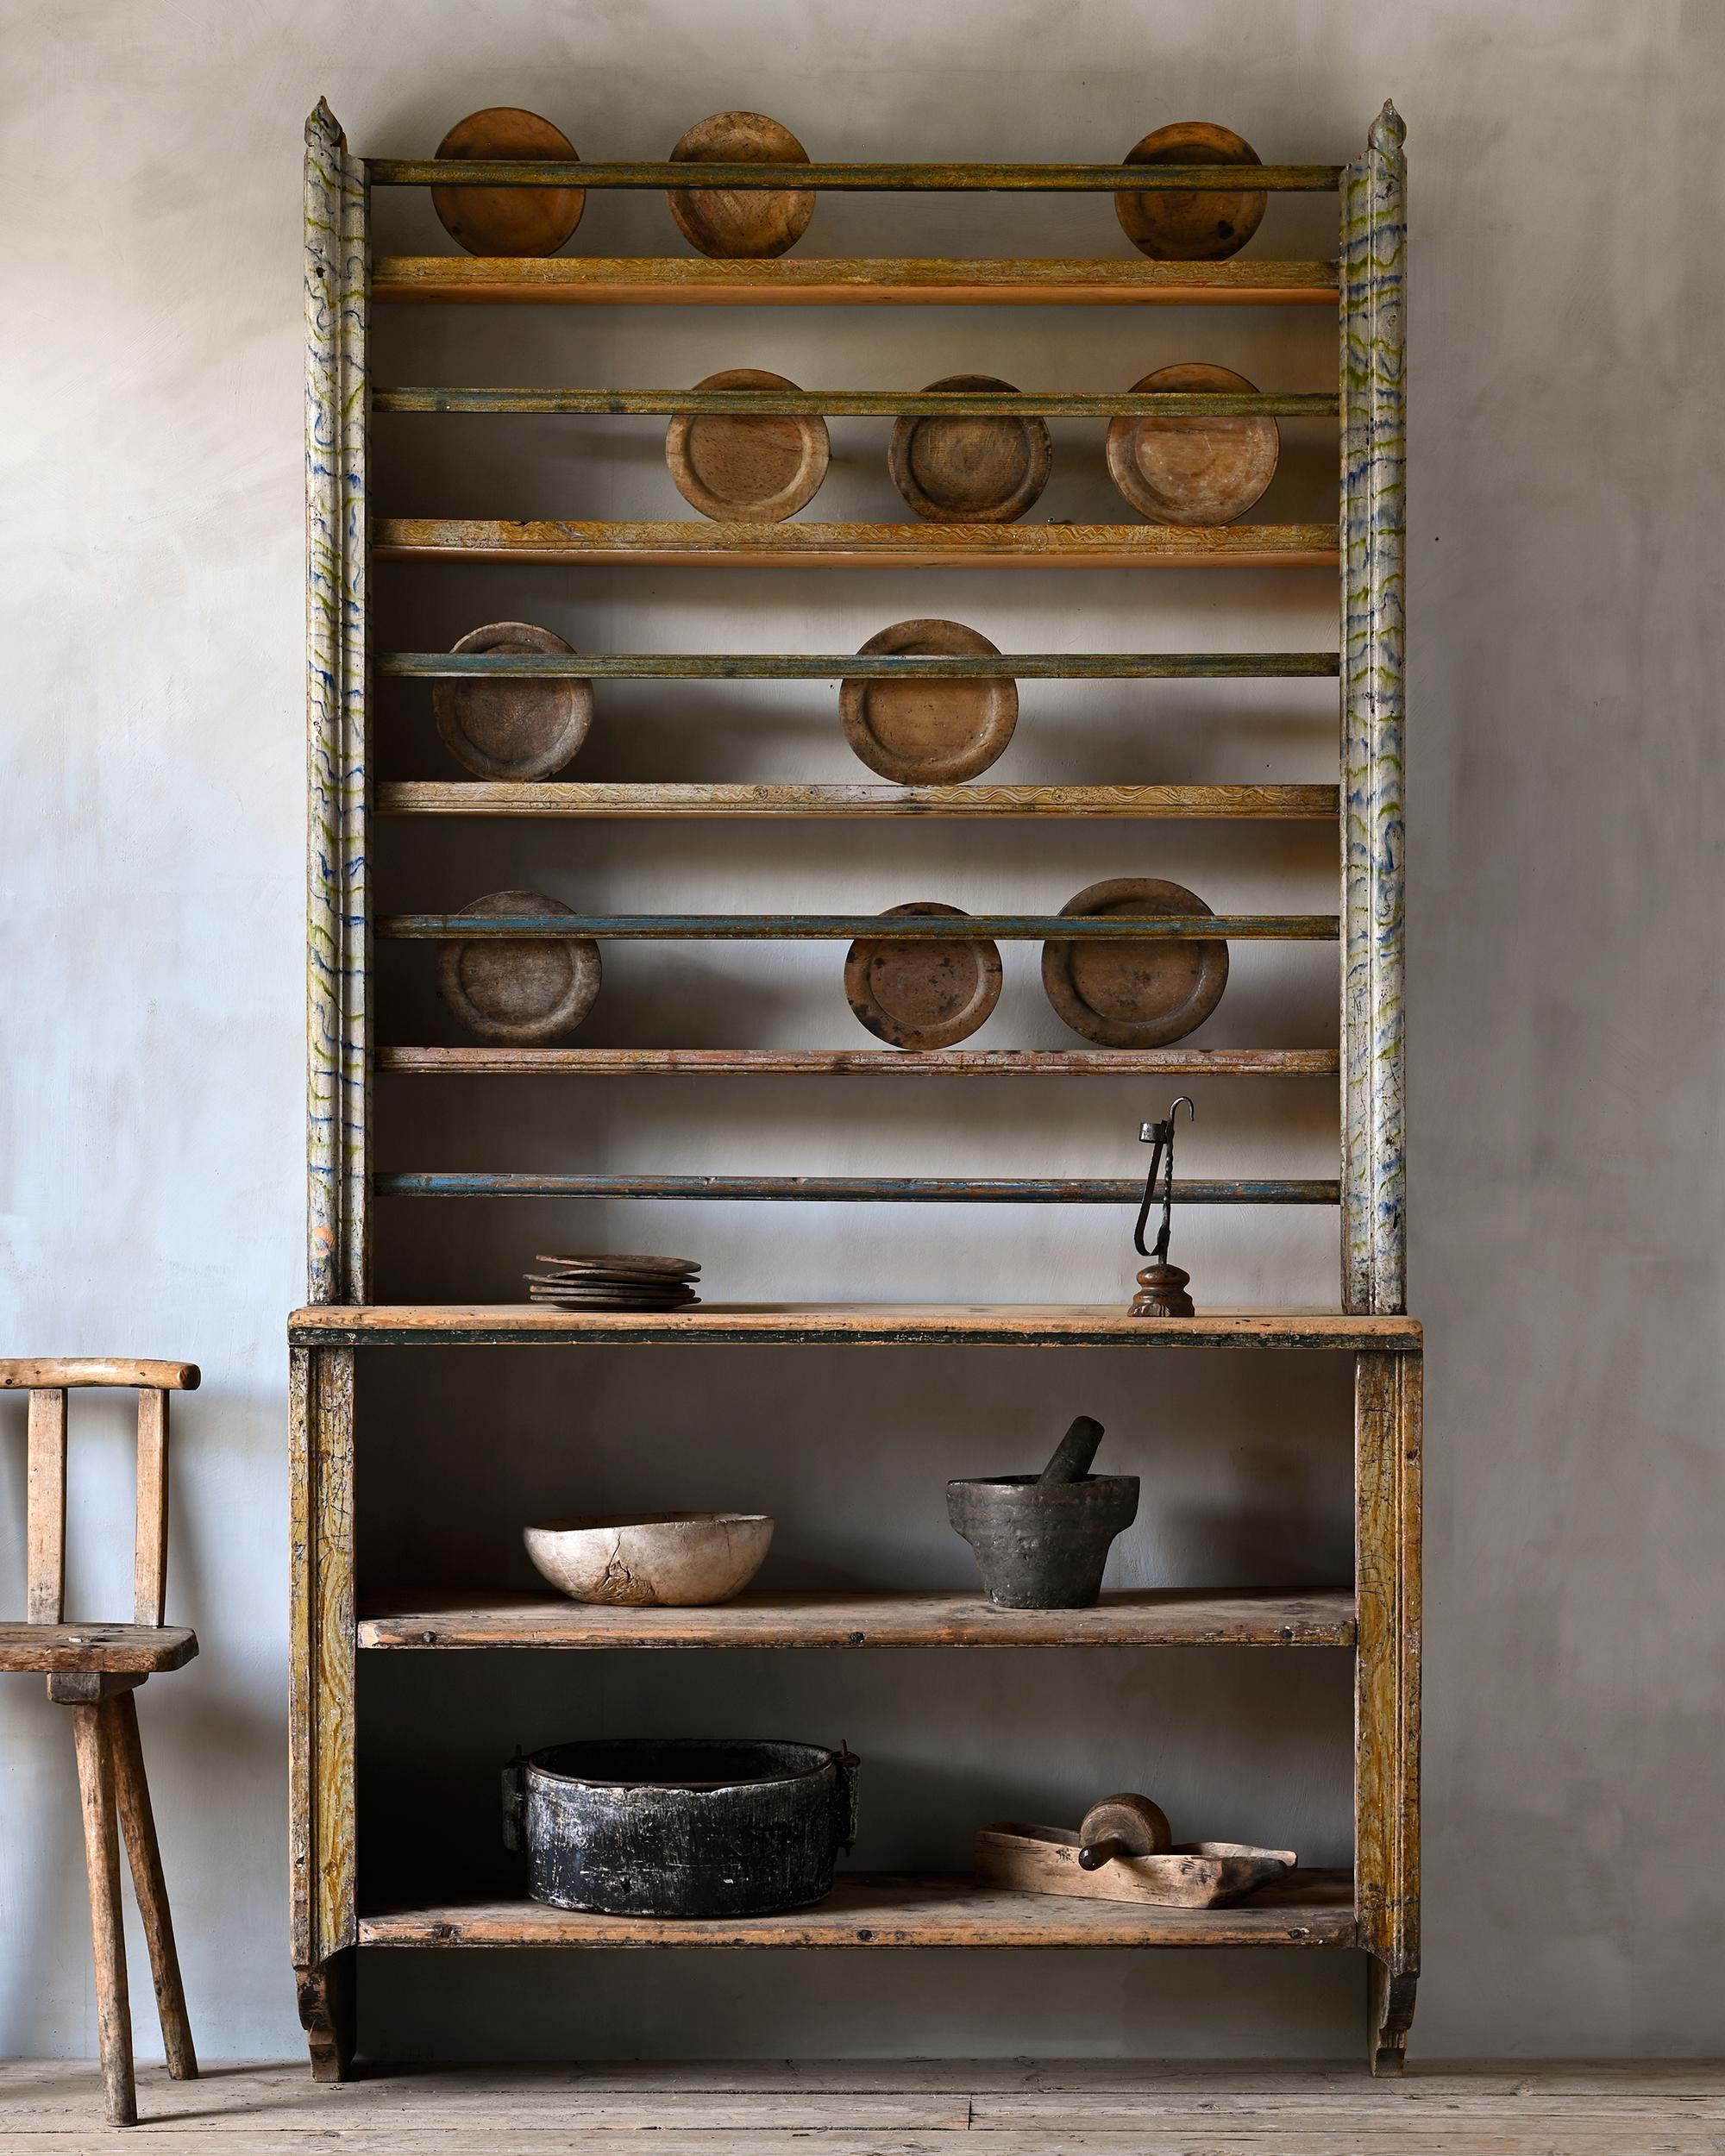 Fantastic and rare 18th century provincial floor standing wall plate rack with shelves from the Gustavian period in its original condition with great patination and color, circa 1790, Sweden. 

